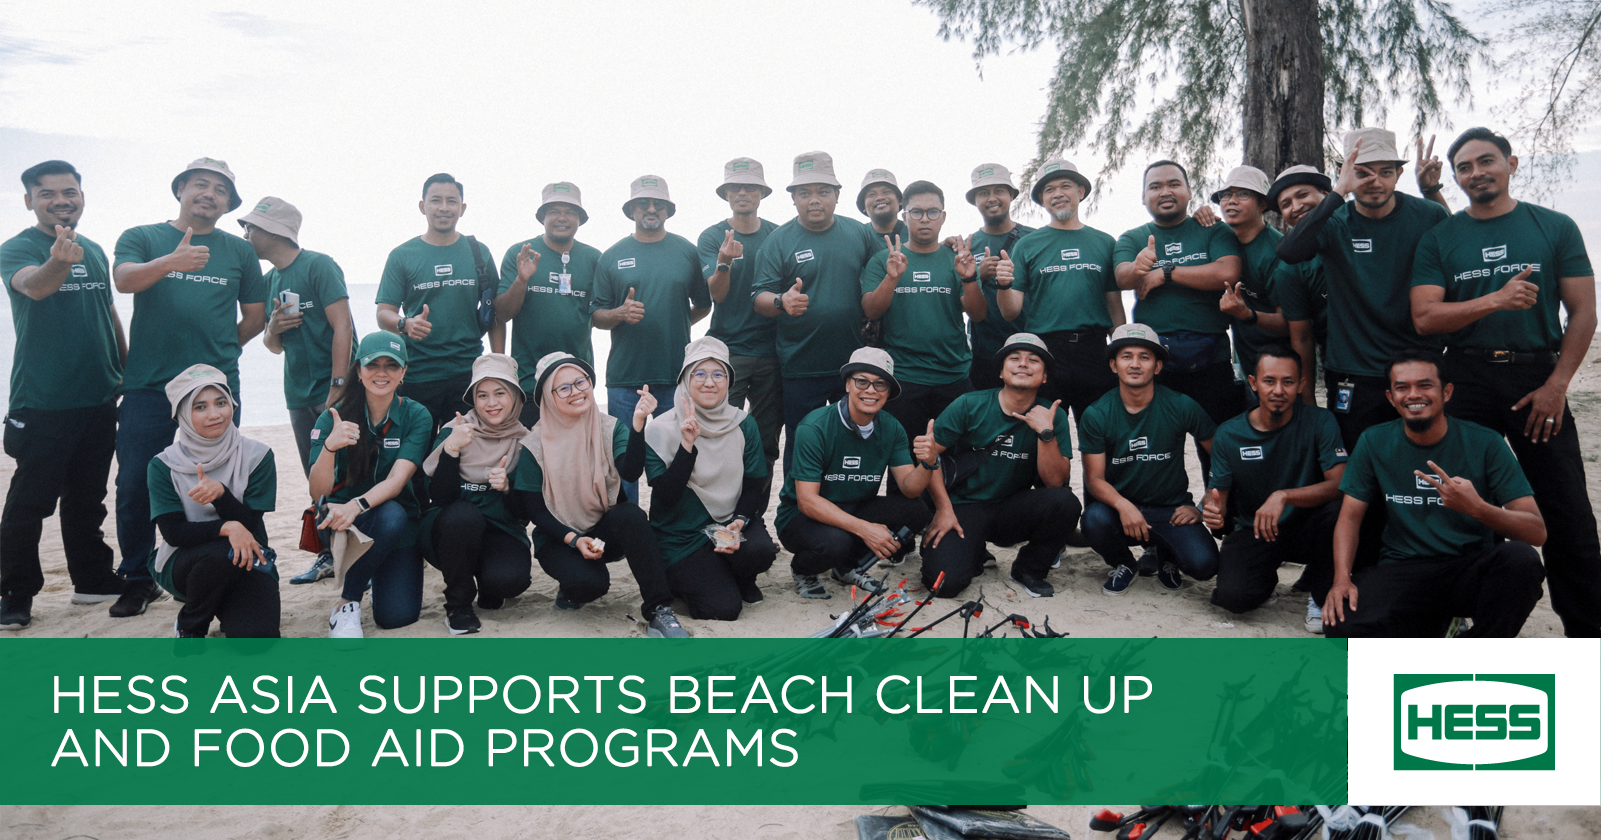 Hess Asia Supports Beach Clean Up and Food Aid Programs